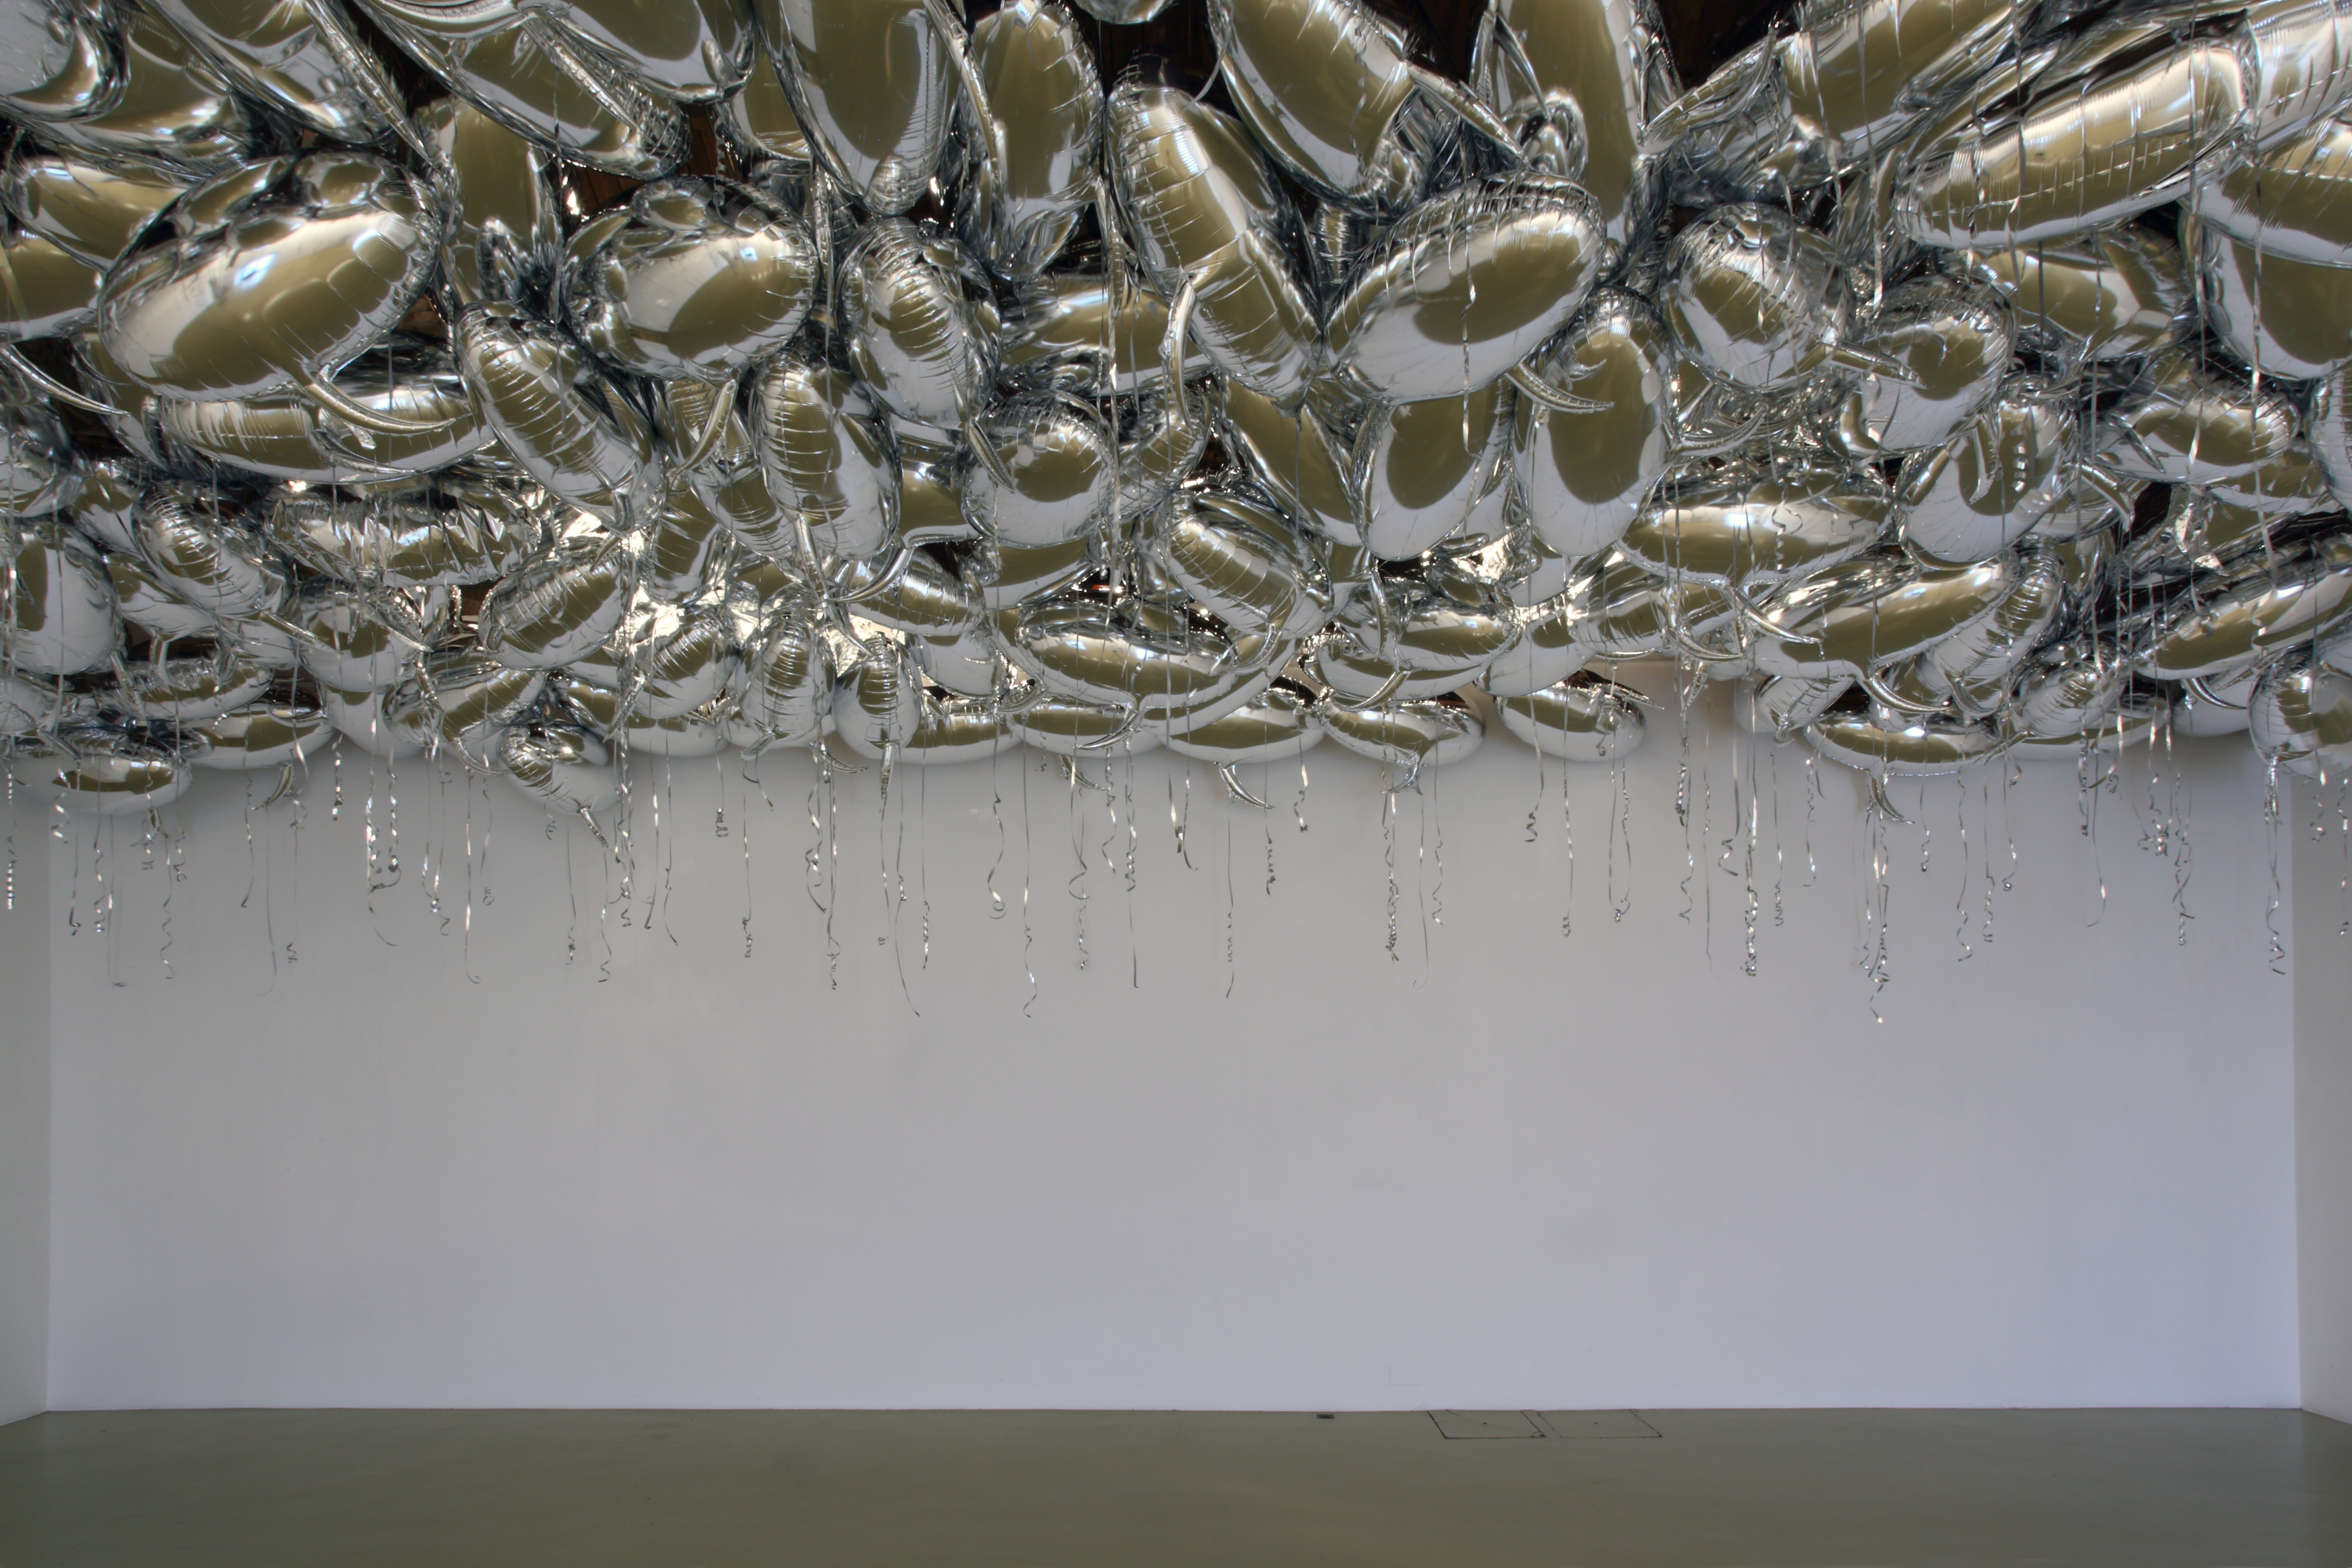 Philippe Parreno From November 5 Until They Fall Down